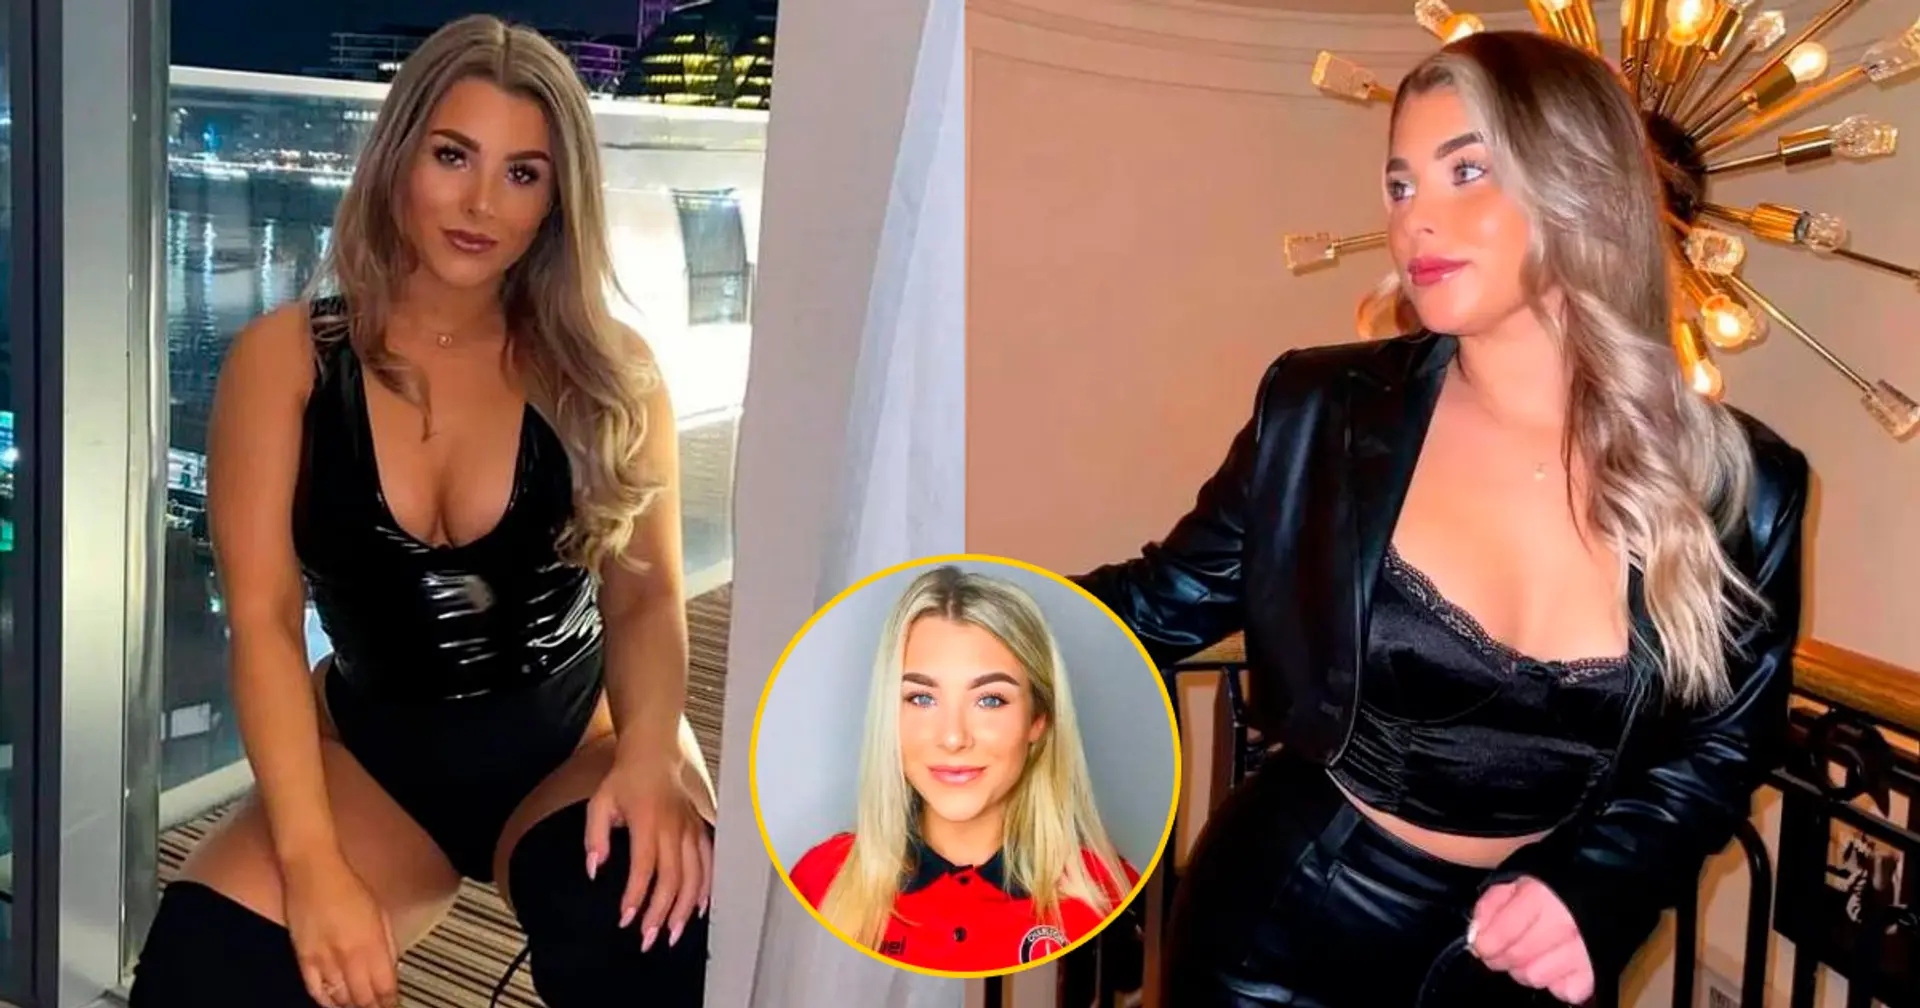 Ex-Charlton footballer starts career with OnlyFans, reveals outrageous sum she’s earned